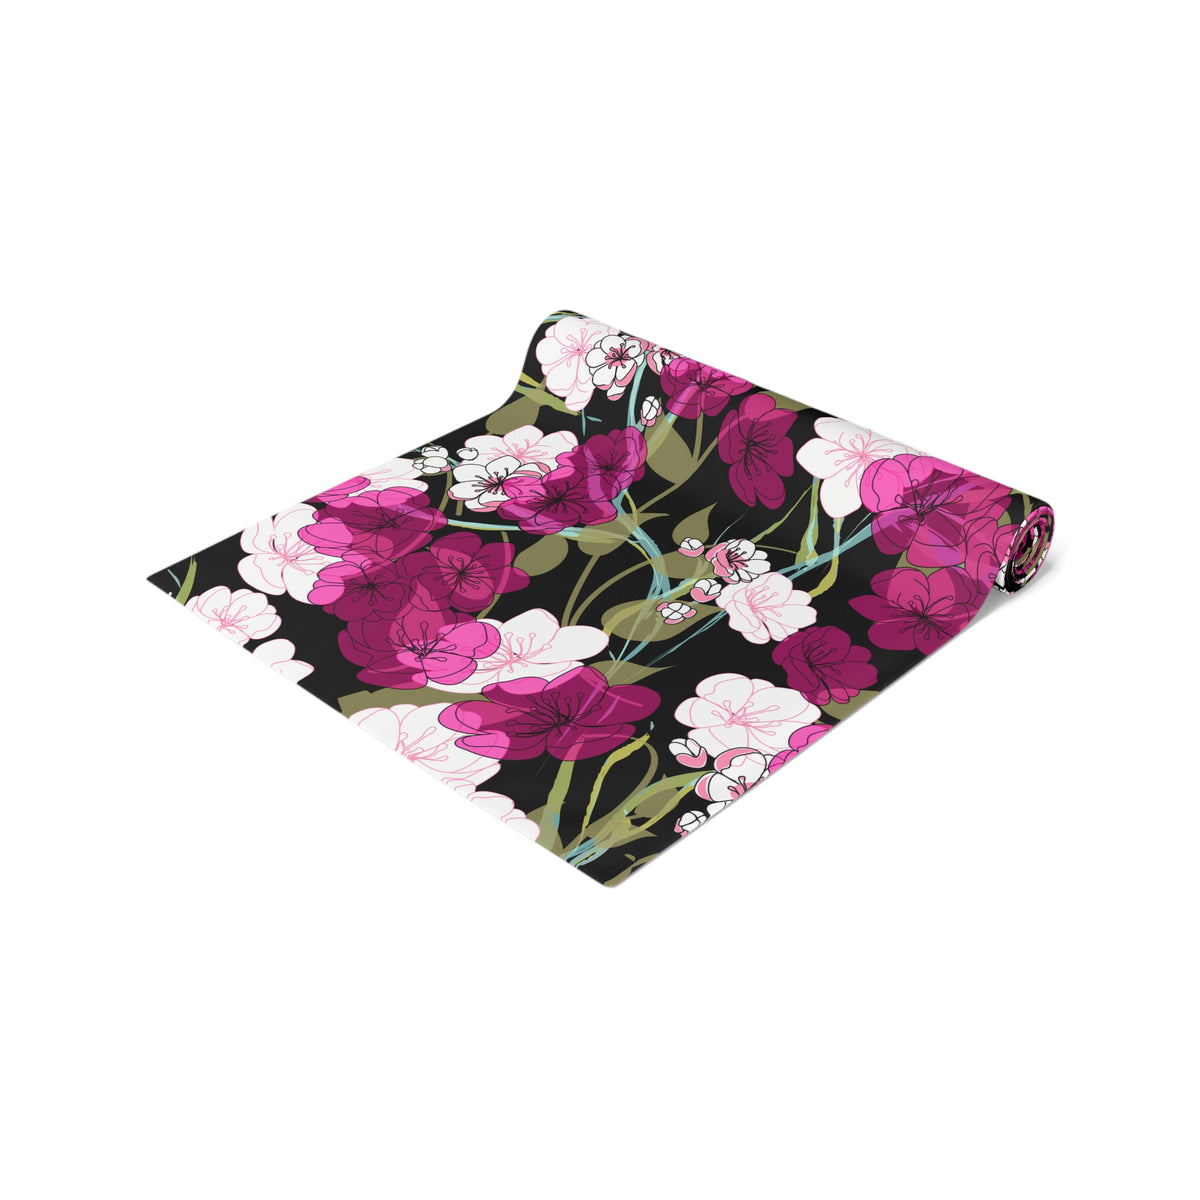 Midnight Table Runner with Cherry Blossom Floral Pattern (16&quot; × 72&quot;)